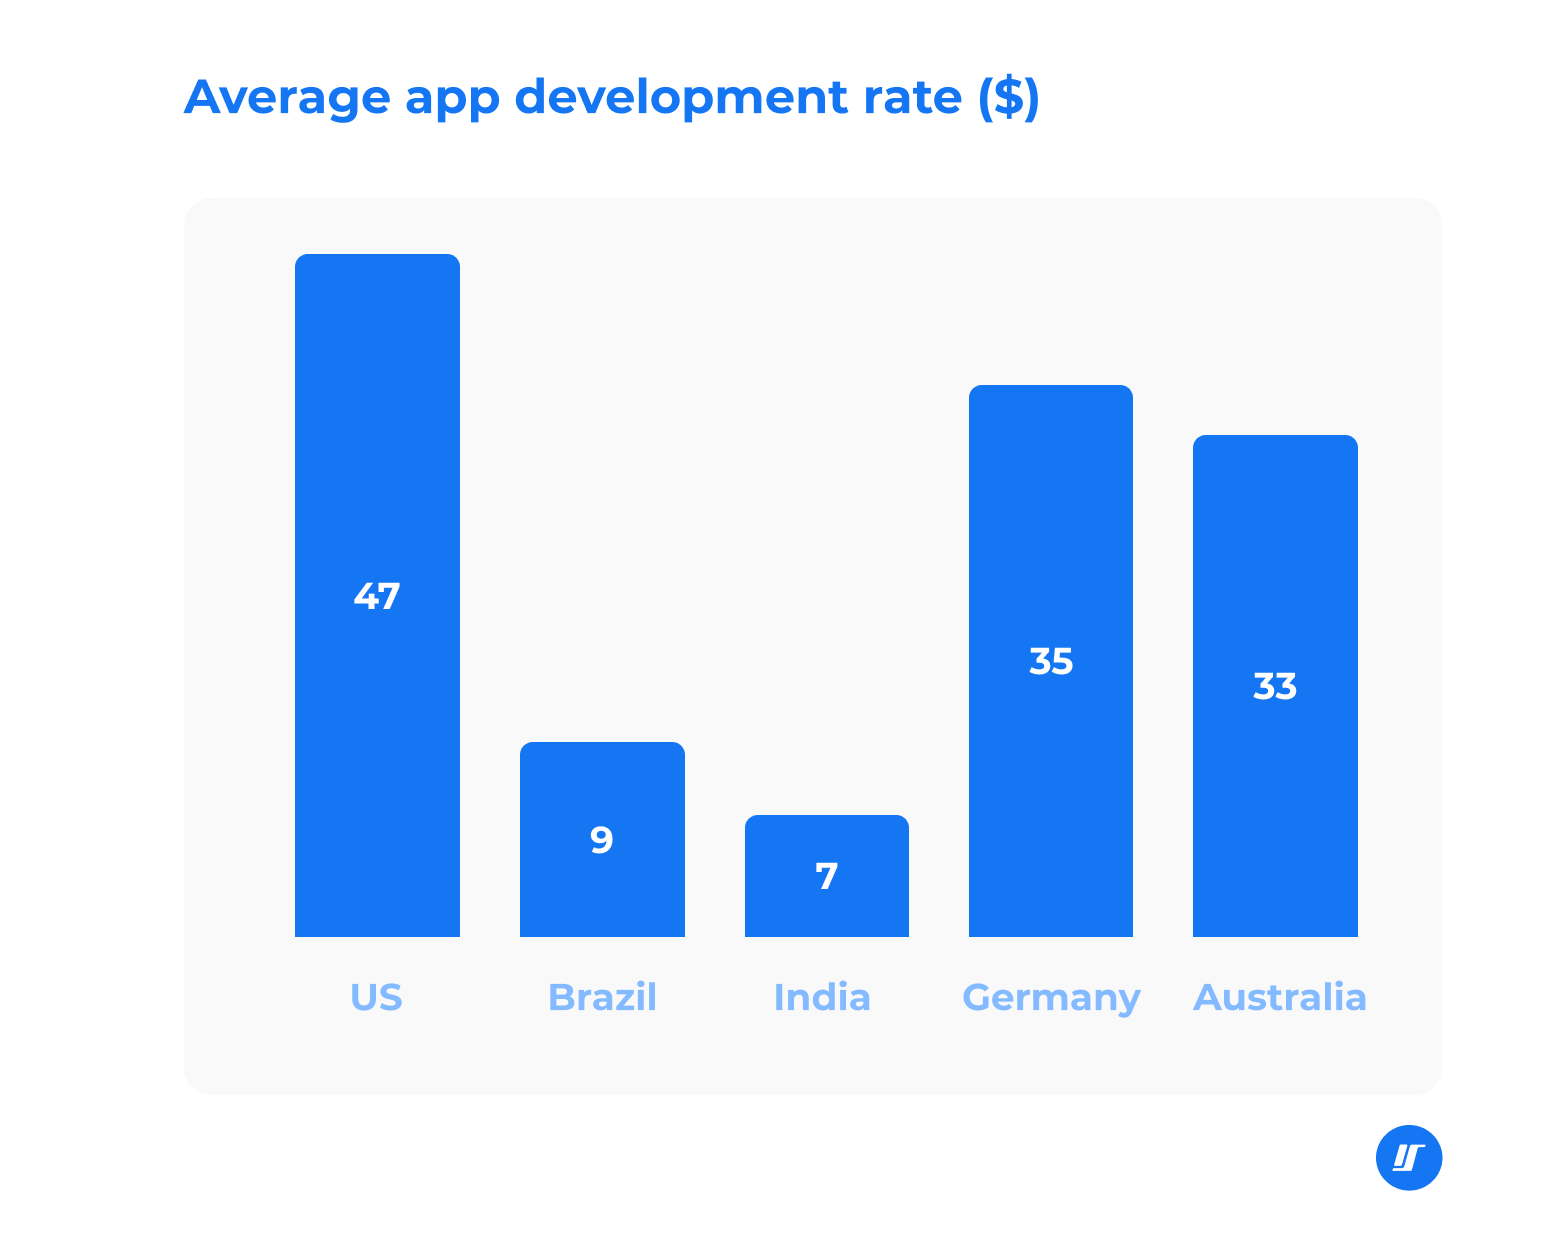 Chart of the average app development rate in dollars